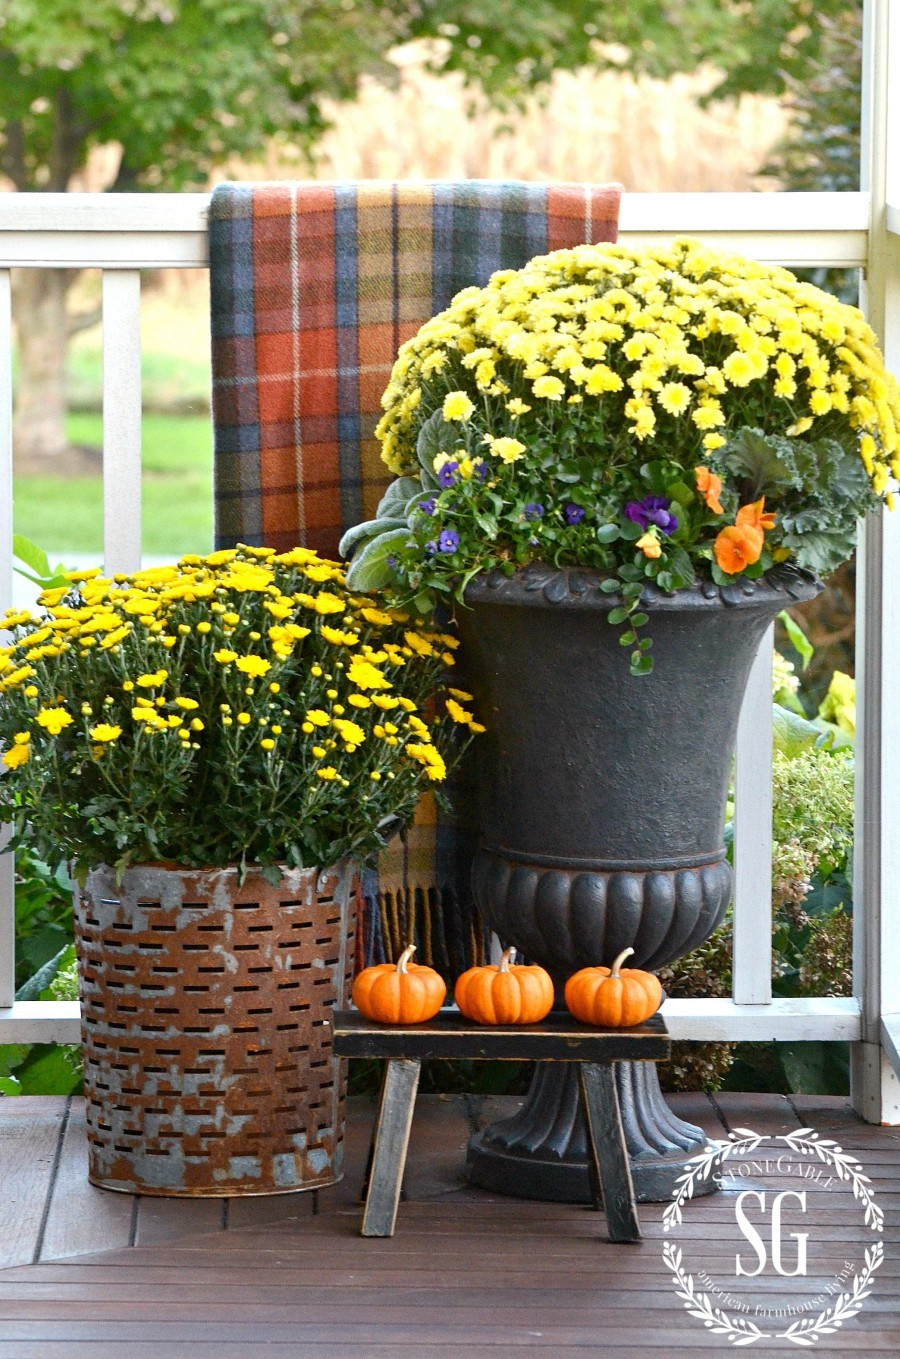 Outdoor Fall Decor
 OUTDOOR FALL DECORATING IN SMALL SPACES StoneGable